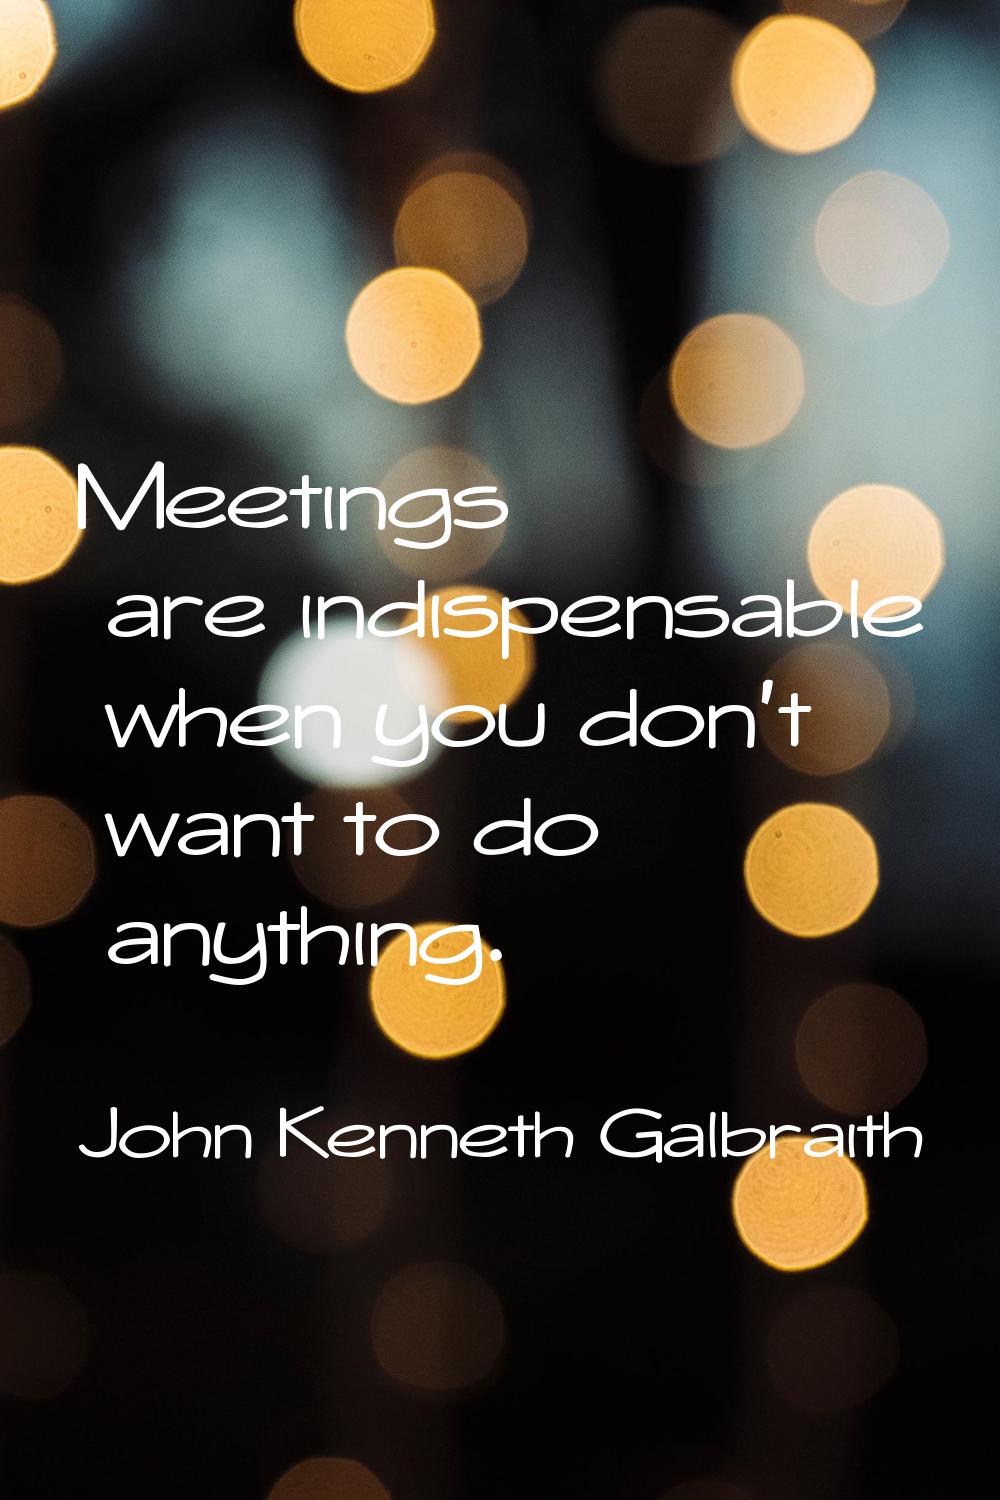 Meetings are indispensable when you don't want to do anything.